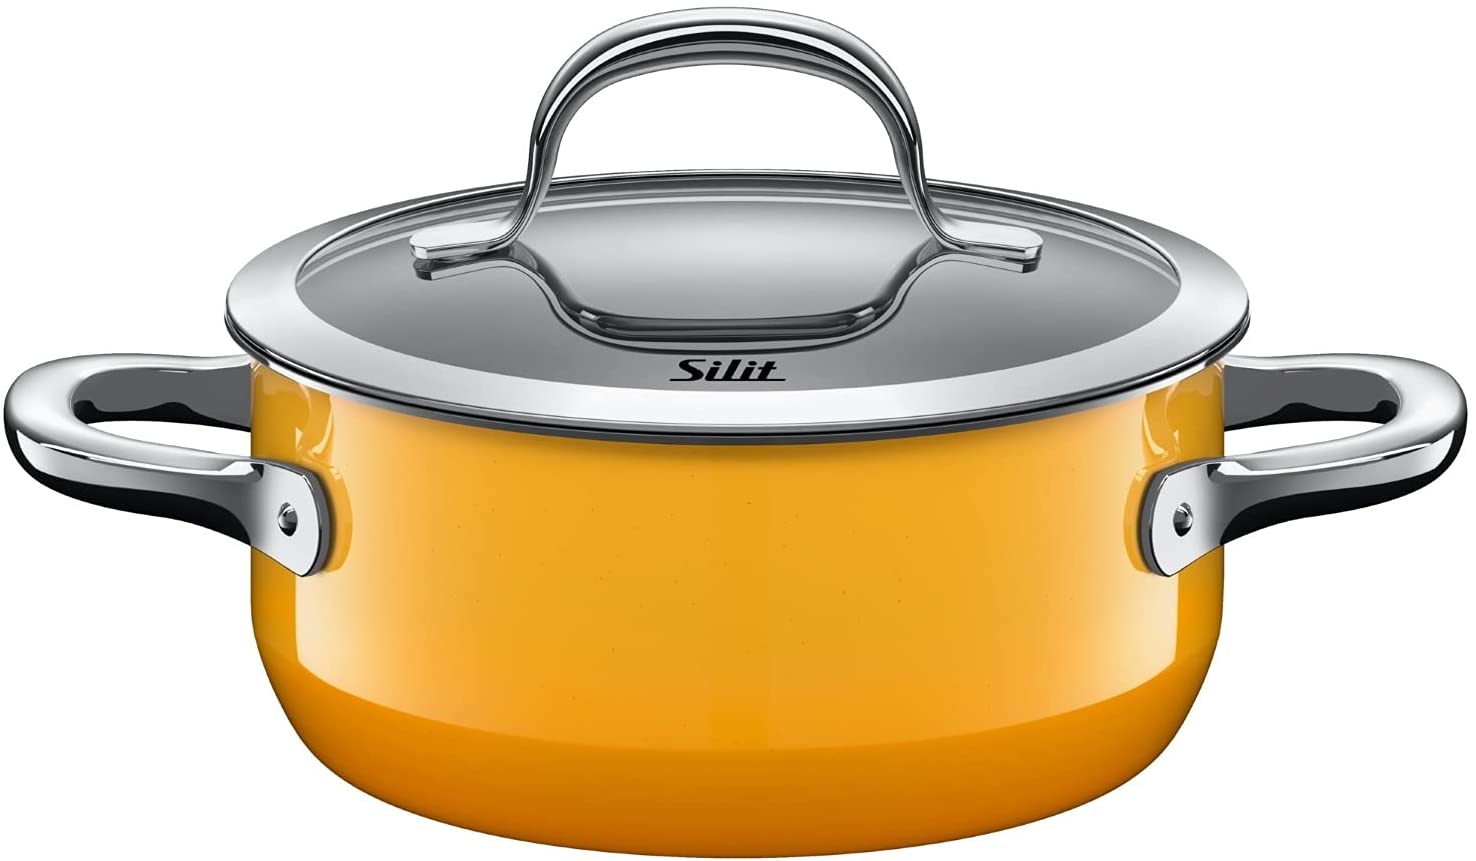 Silit Passion Yellow Saucepan with Glass Lid Diameter 16 cm Silargan Functional Ceramic Pouring Rim Suitable for Induction Cookers Yellow 1.3 L